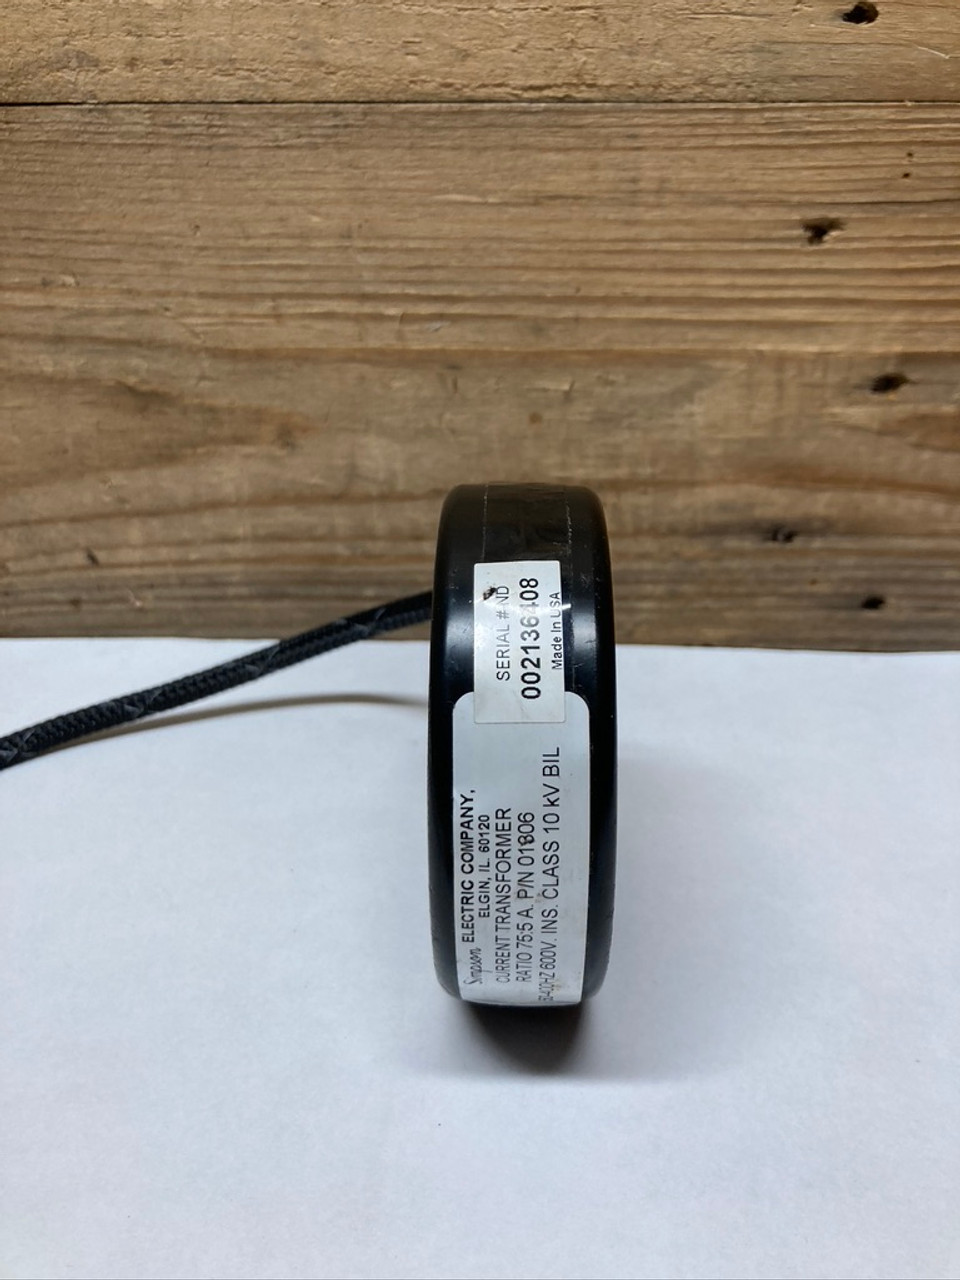 Current Transformer 01306 Simpson Electric